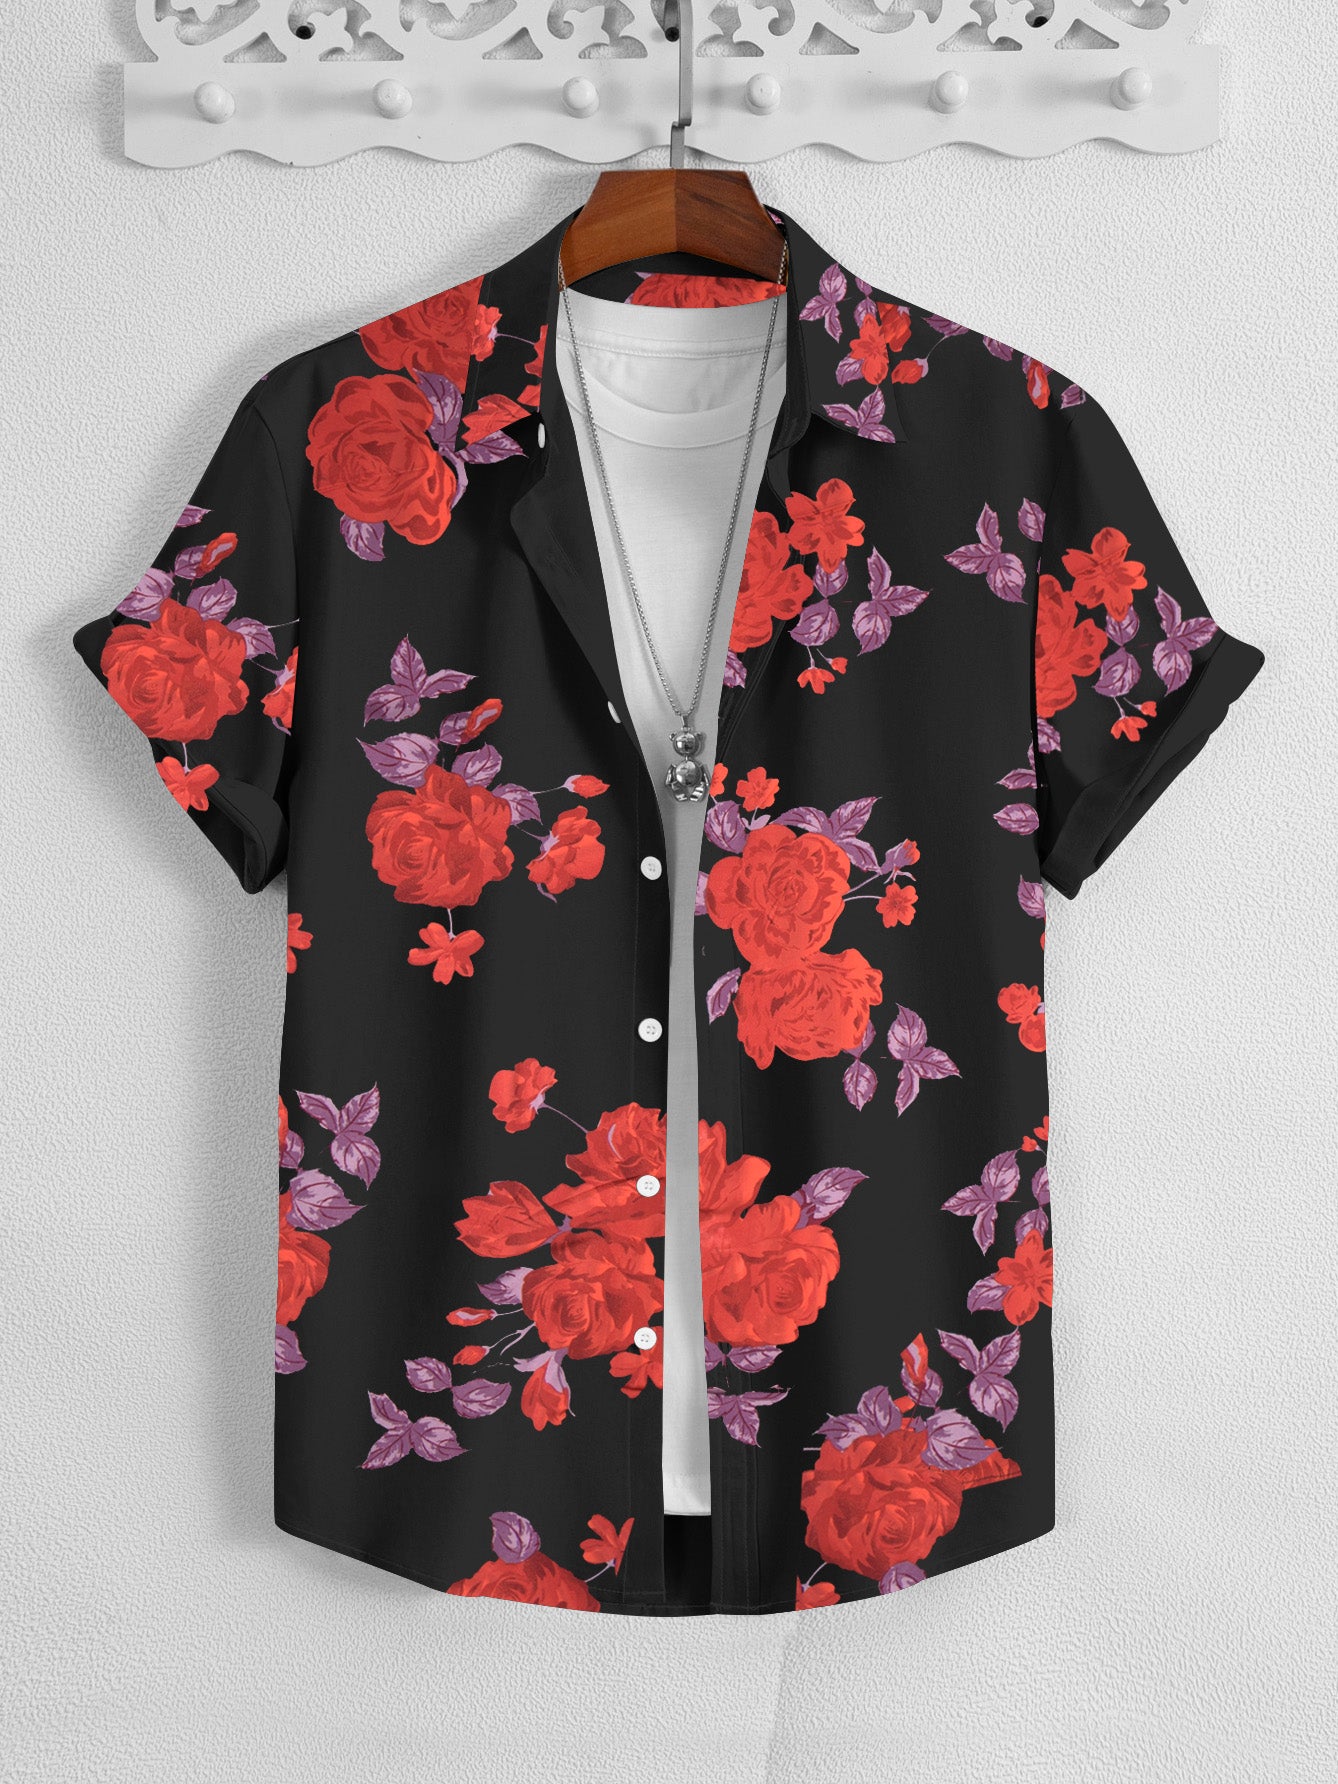 OXEN Premium Half Sleeve Slim Fit Casual Shirt For Men-Black with Allover Floral Print-SP2128